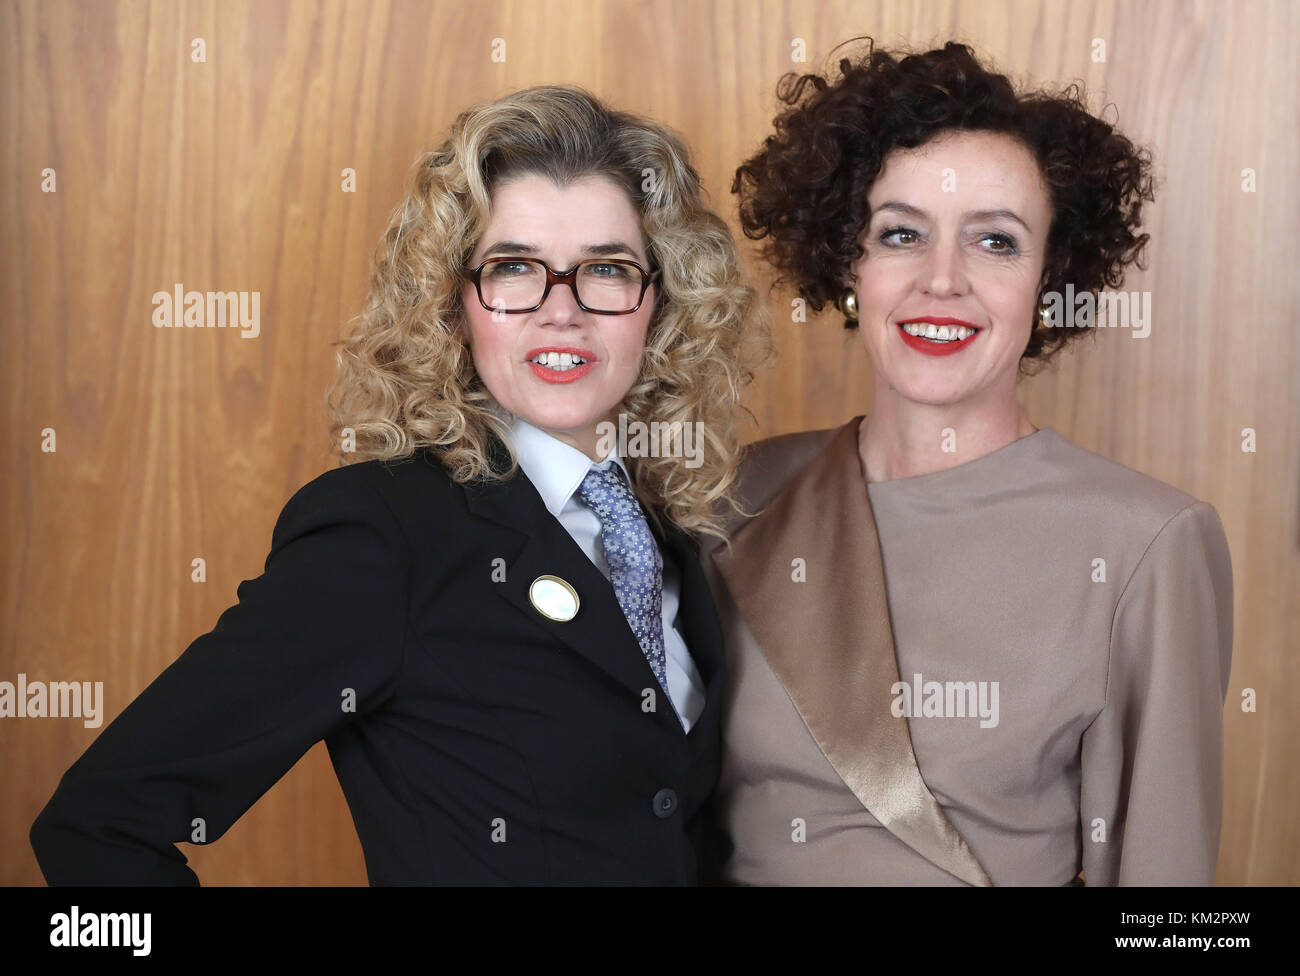 Berlin, Germany. 04th Dec, 2017. Actresses Anke Engelke (L) and Maria  Schrader during the shooting of the Amazon Prime video series "Deutschland  86" ('Germany 86') in Berlin, Germany, 04 December 2017. The